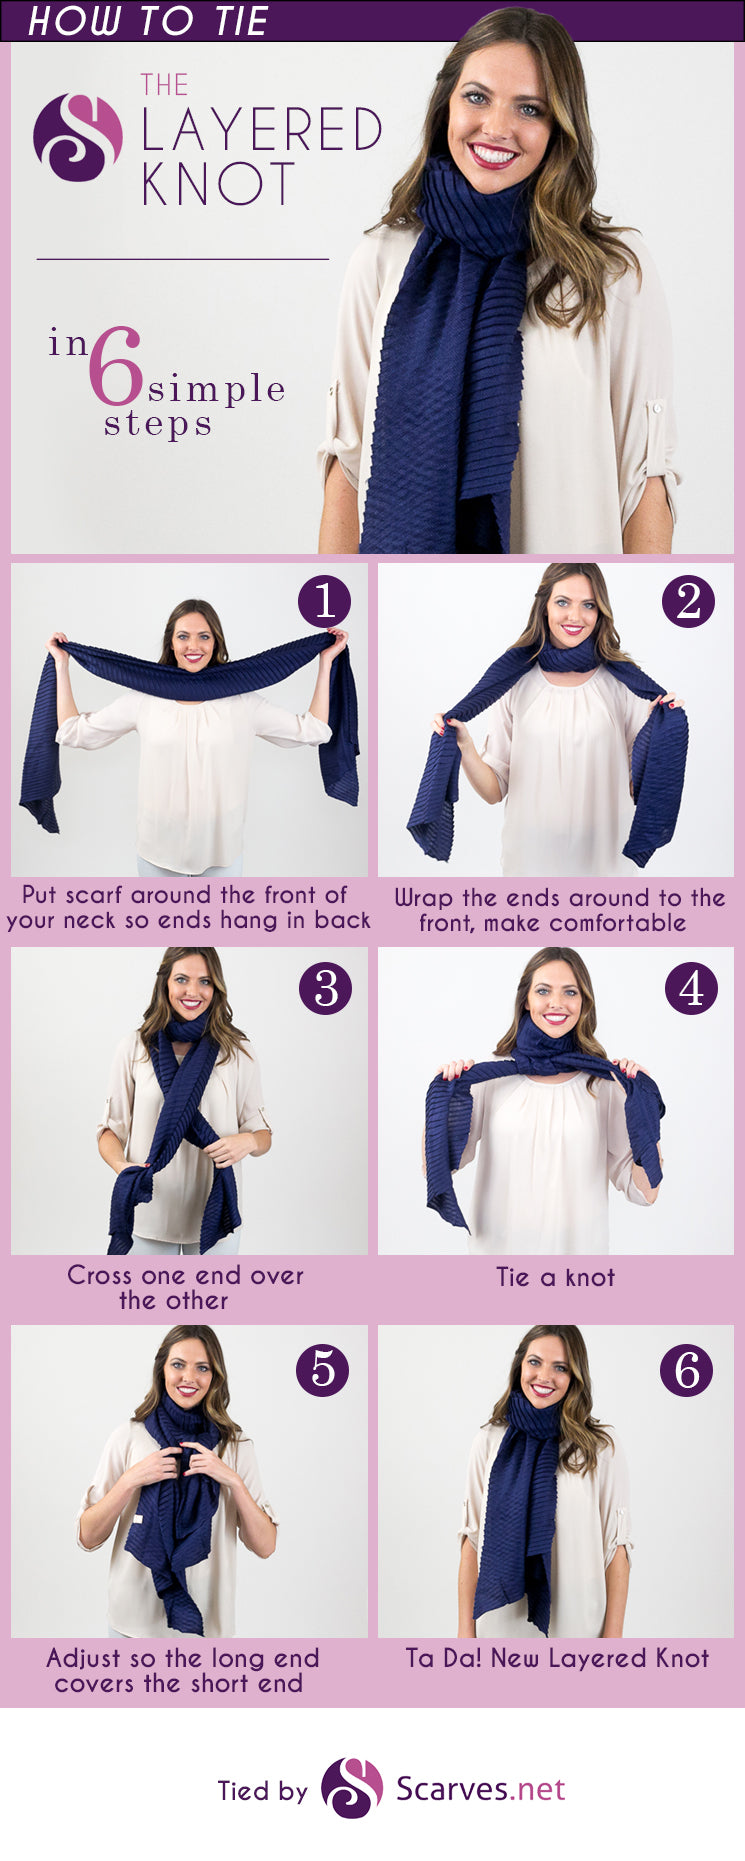 Layered Knot in 5 simple steps